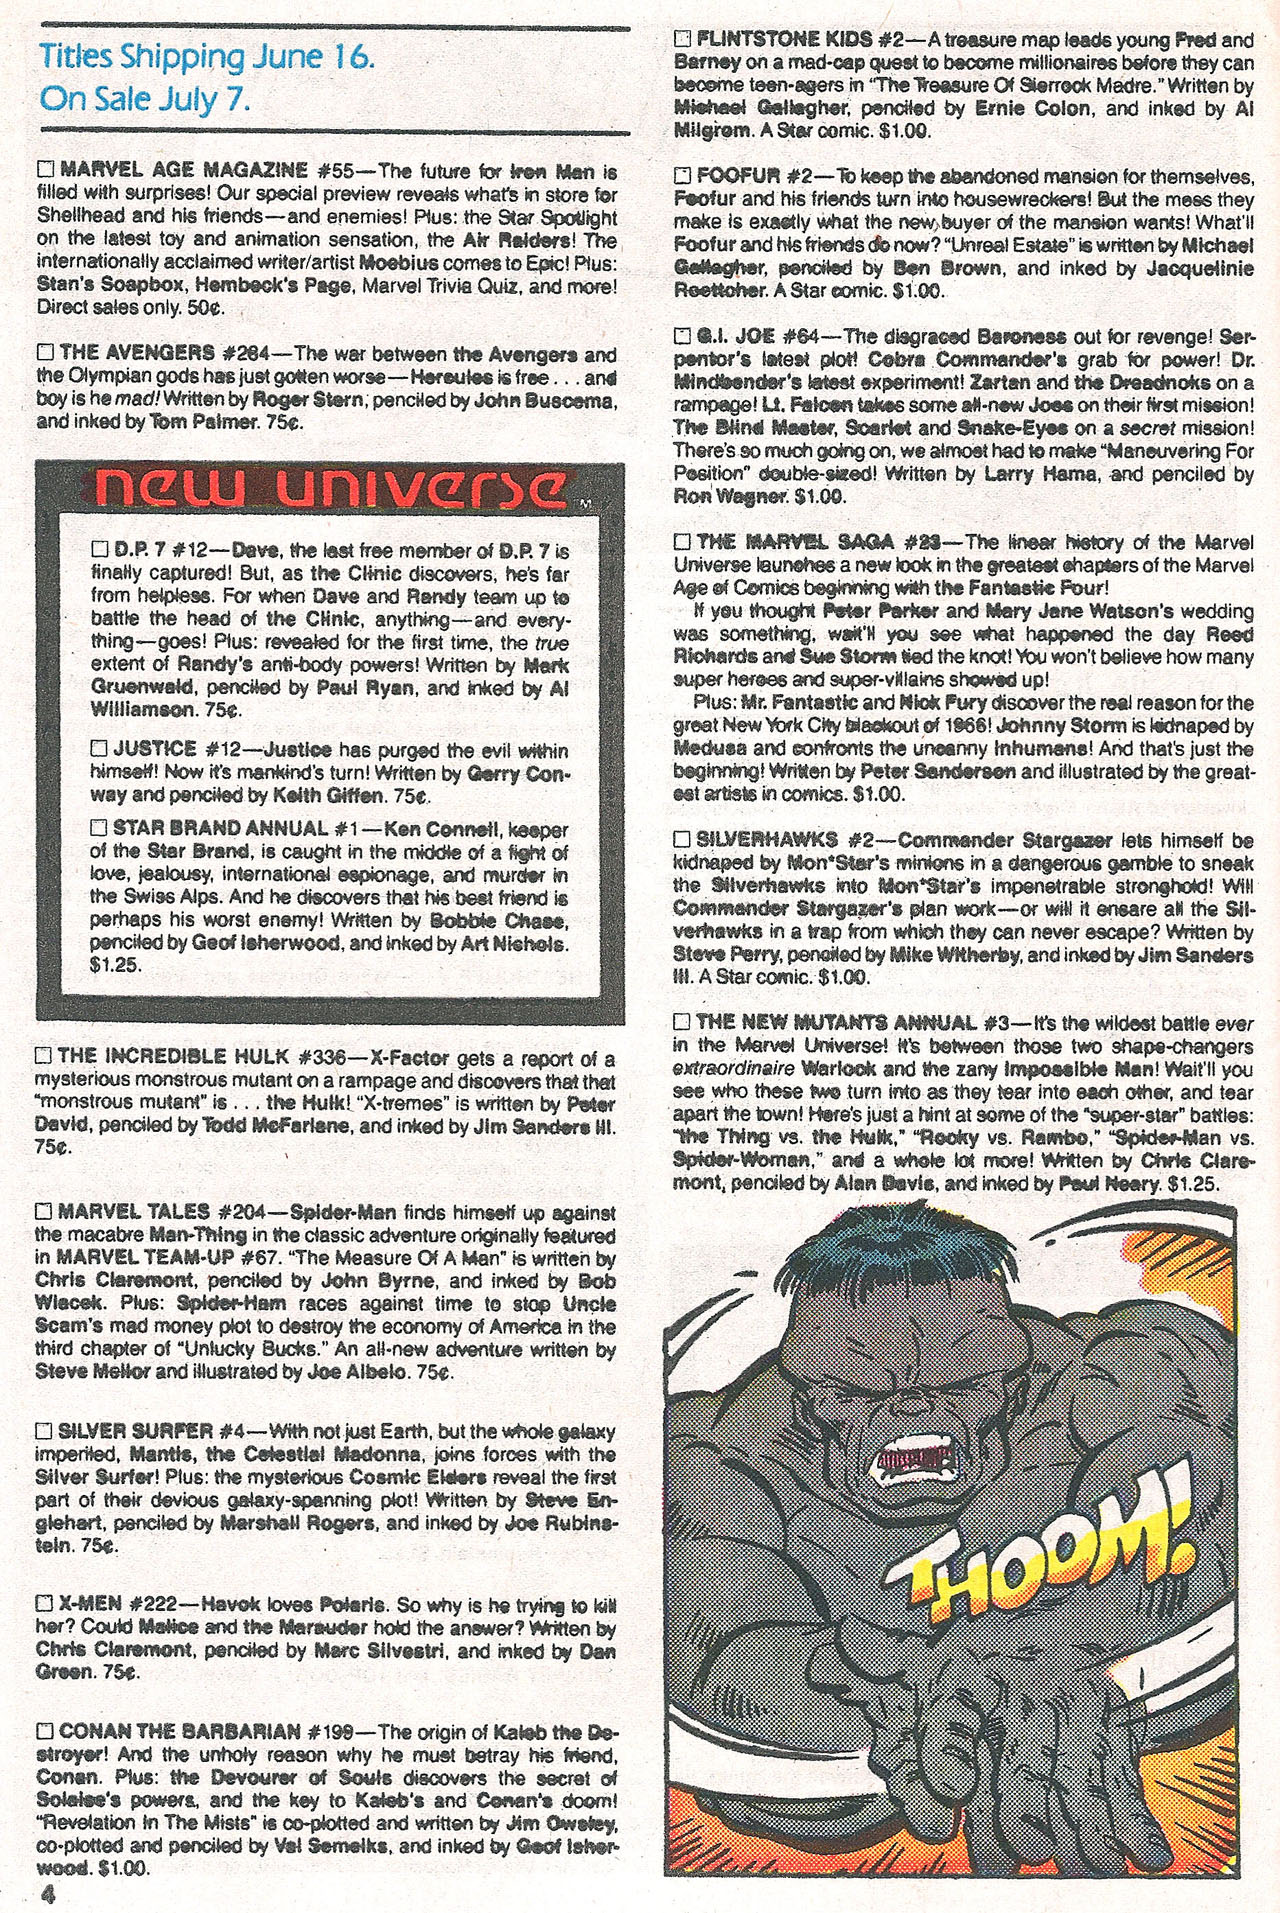 Read online Marvel Age comic -  Issue #54 - 6